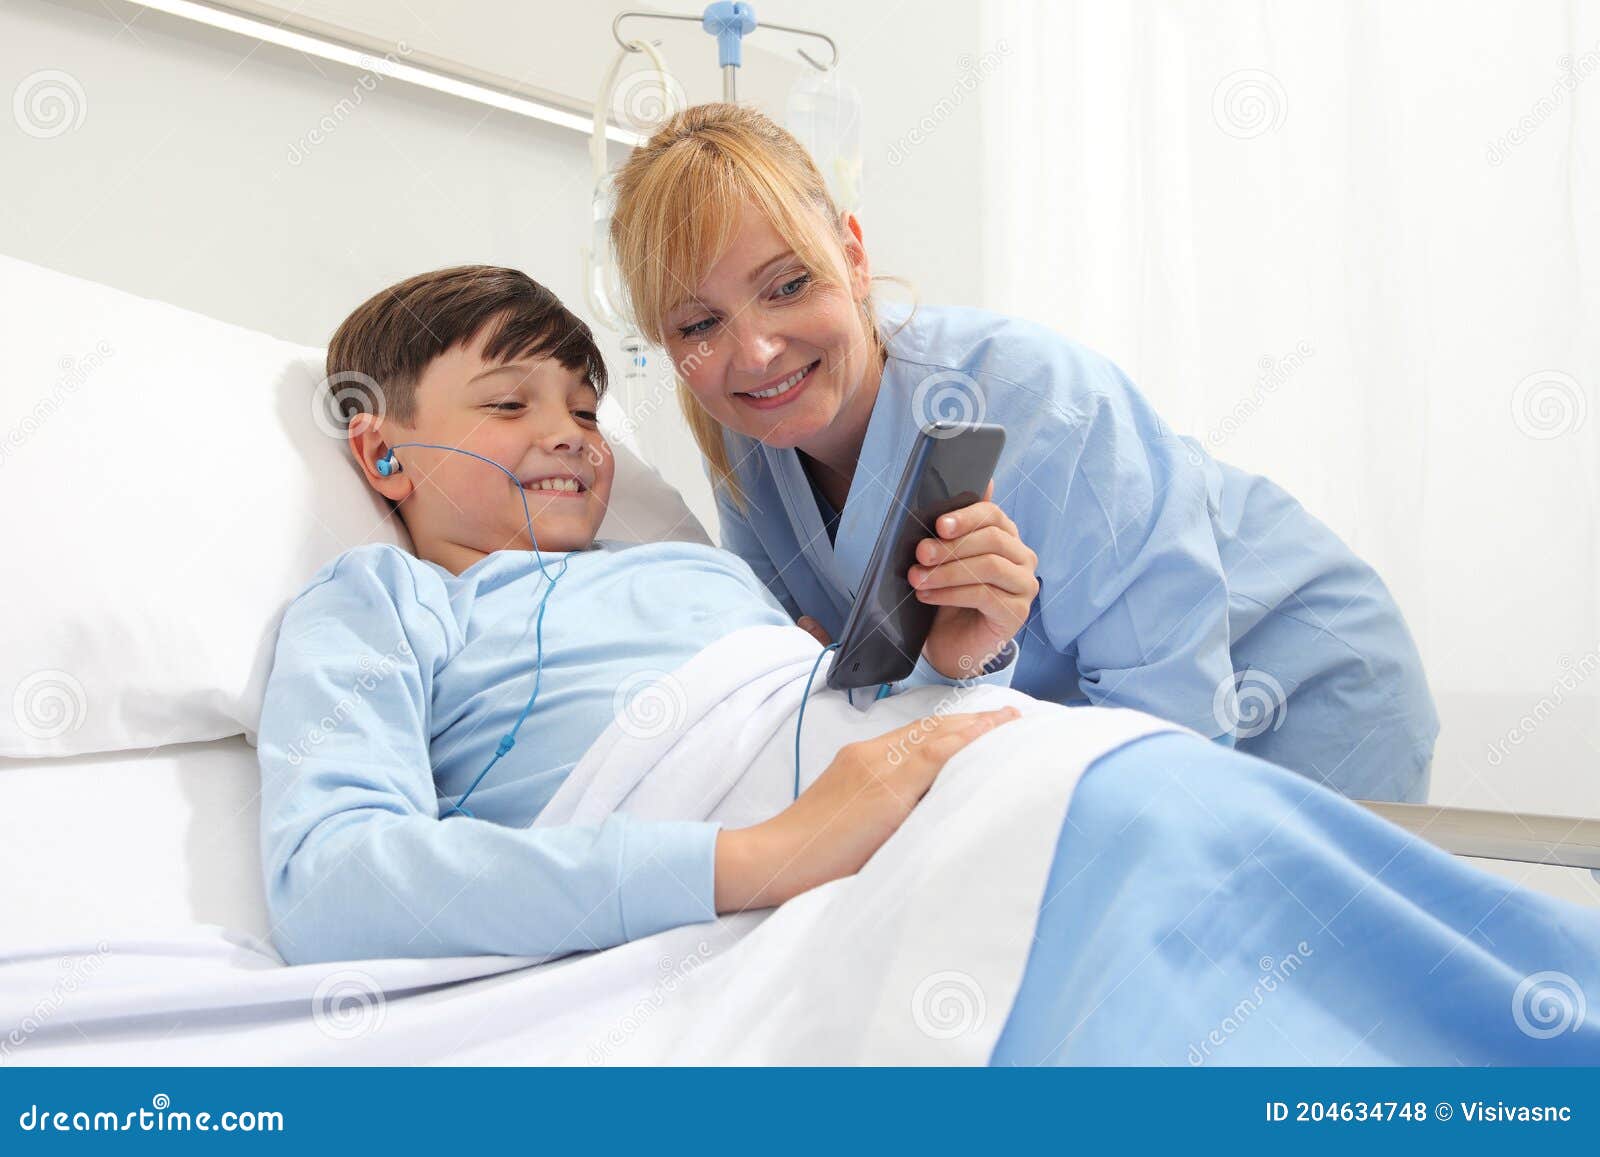 happy child lying in bed in hospital room and smiling nurse using smartphone surfs the internet wearing earphones